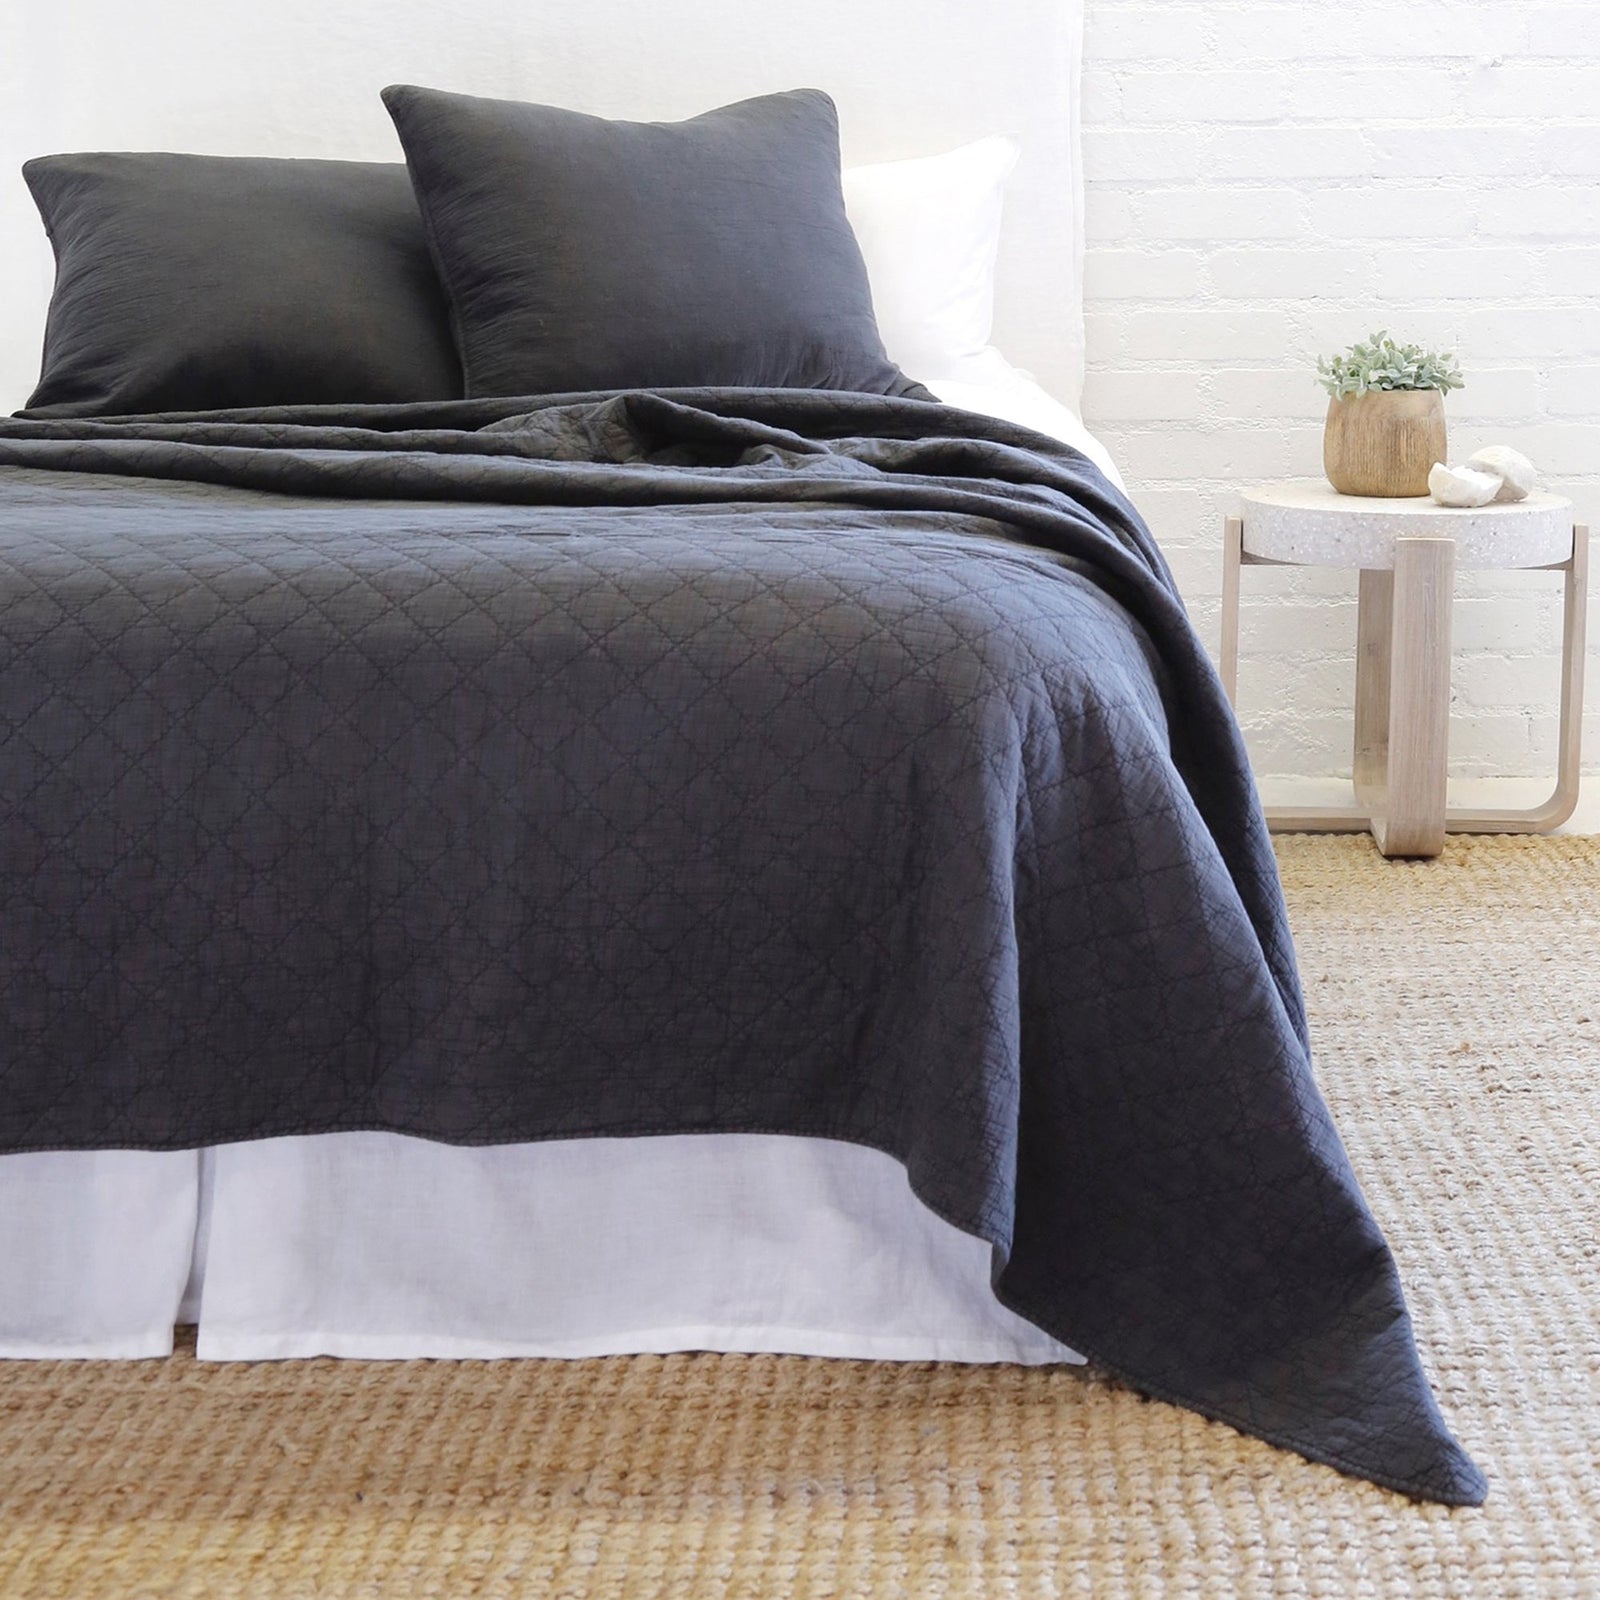 Pom Pom at Home - Huntington Midnight Coverlet Collection - Fig Linens